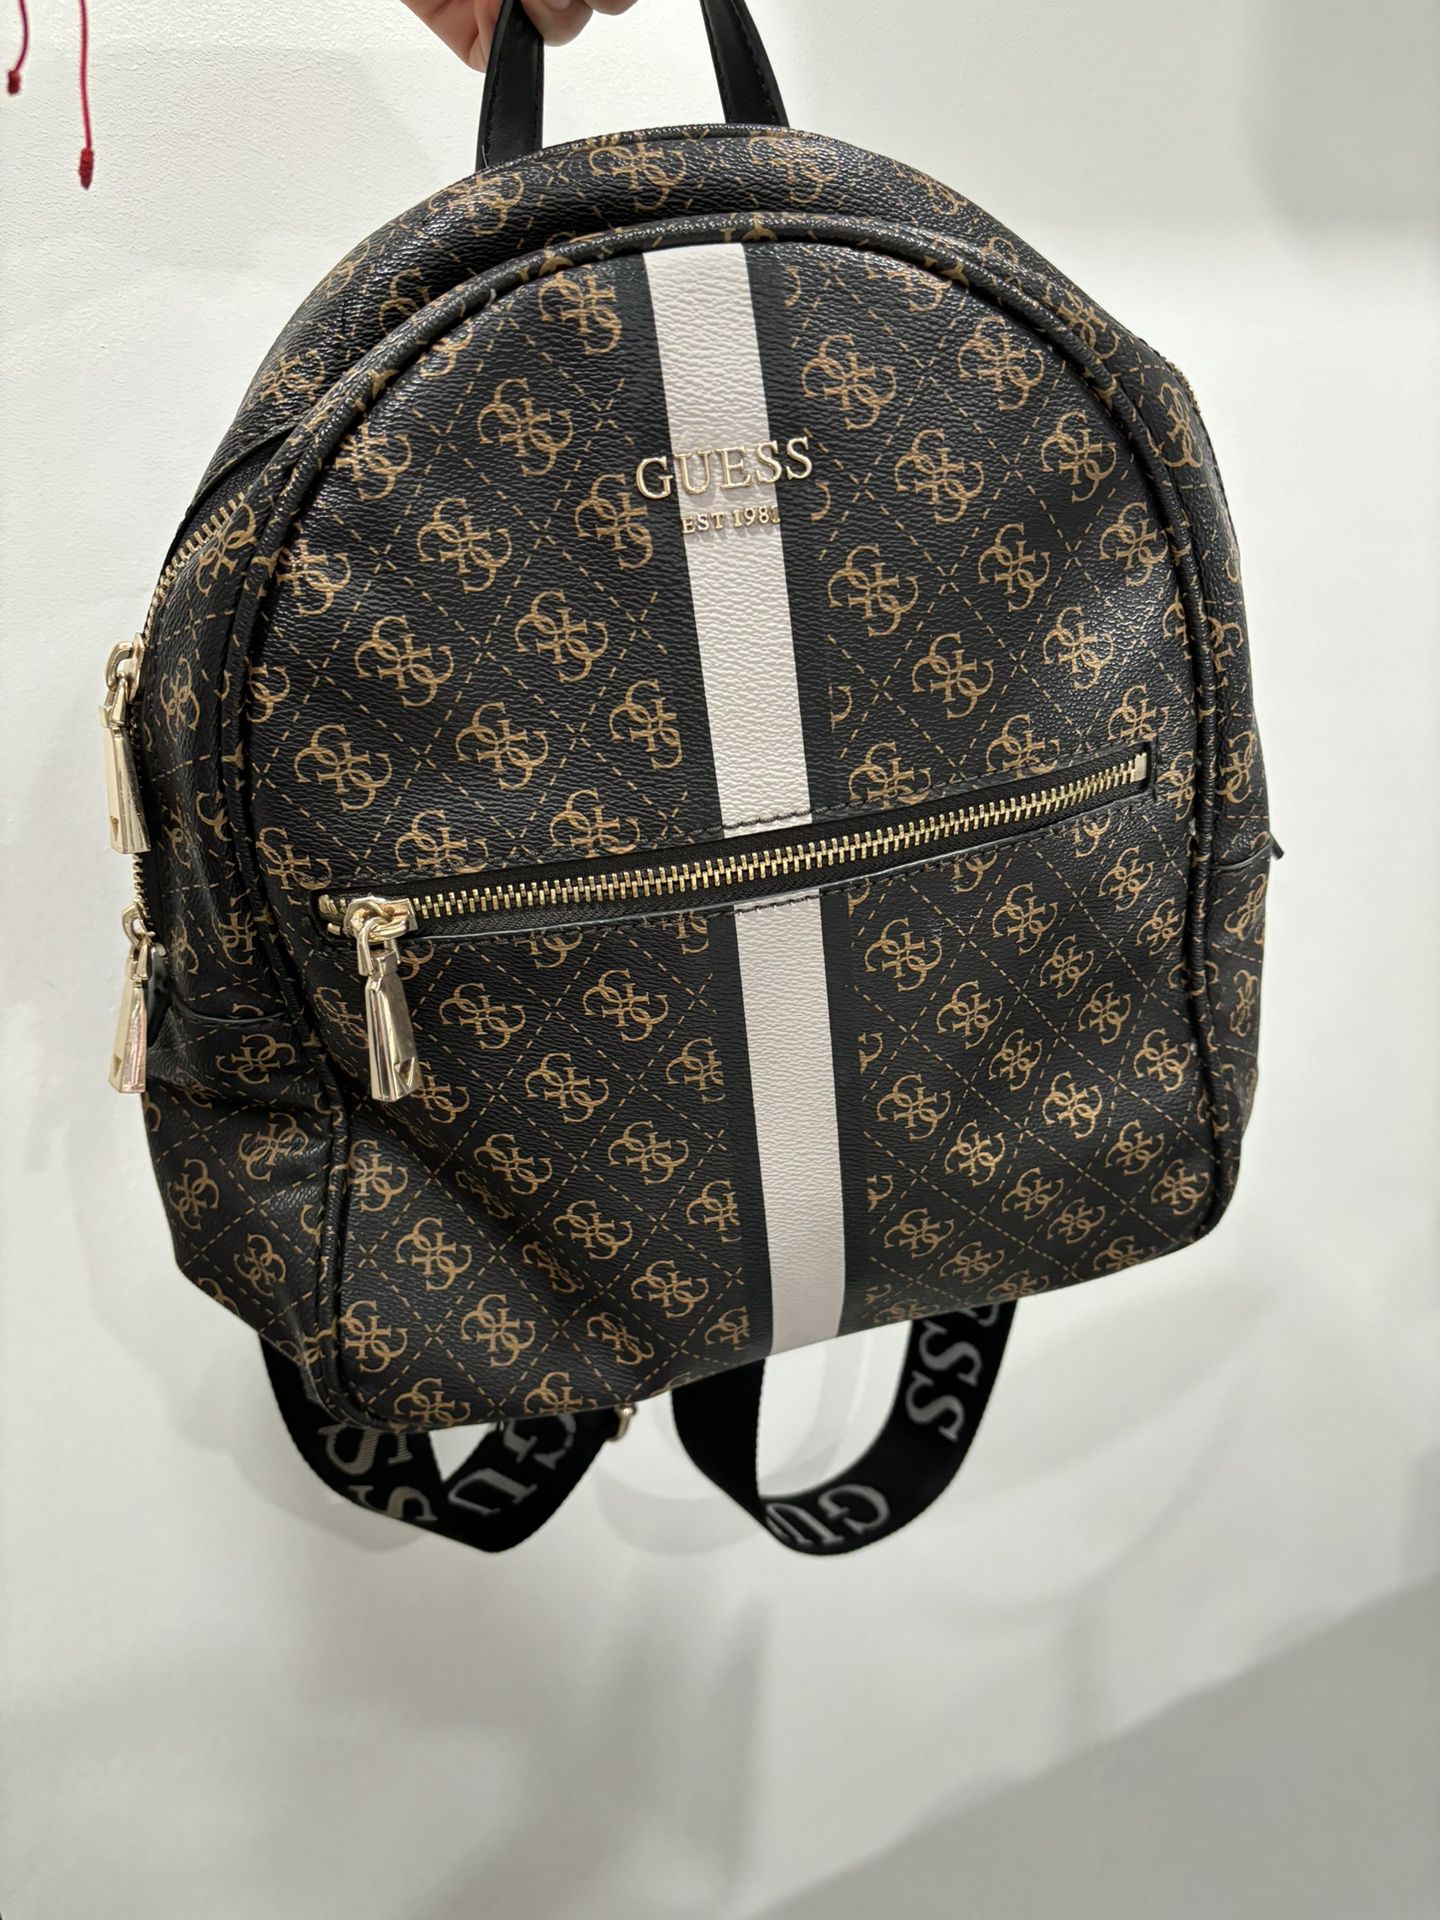 Guess Backpack $ 19